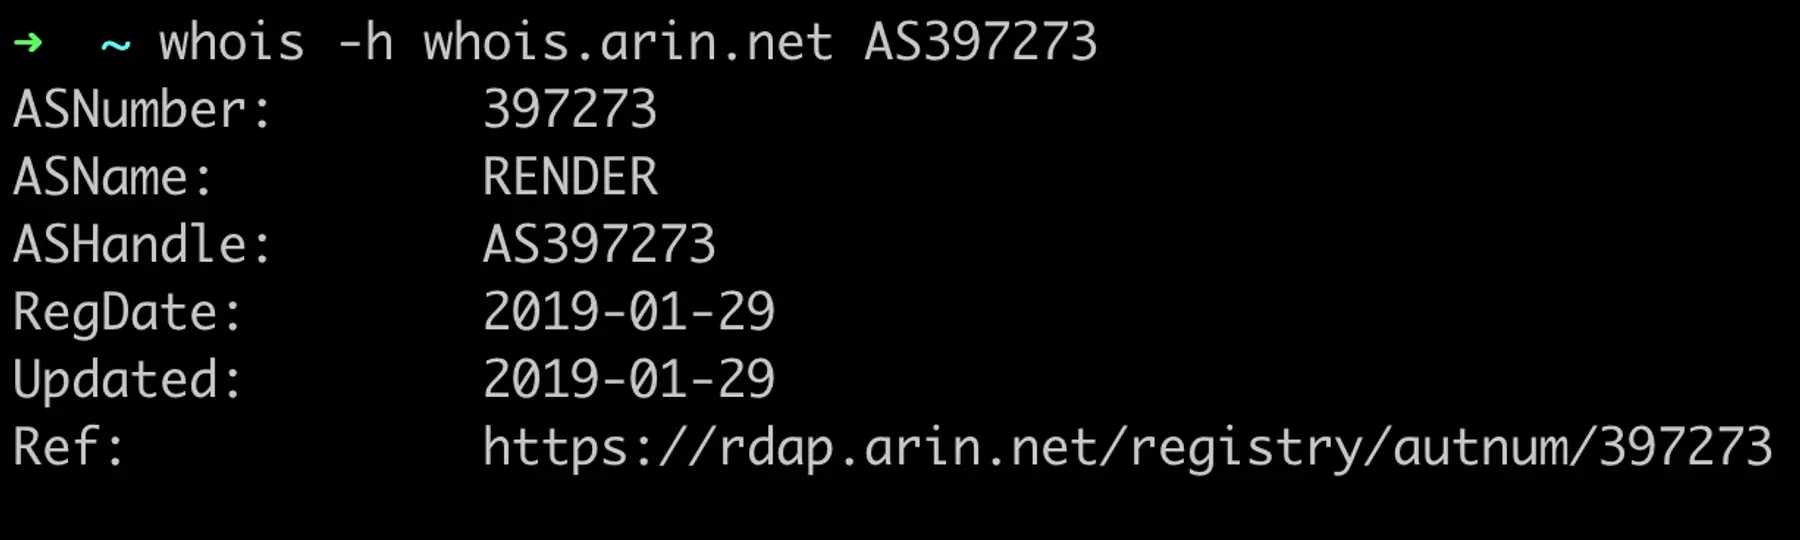 A screenshot showing a whois lookup for Render's ASN